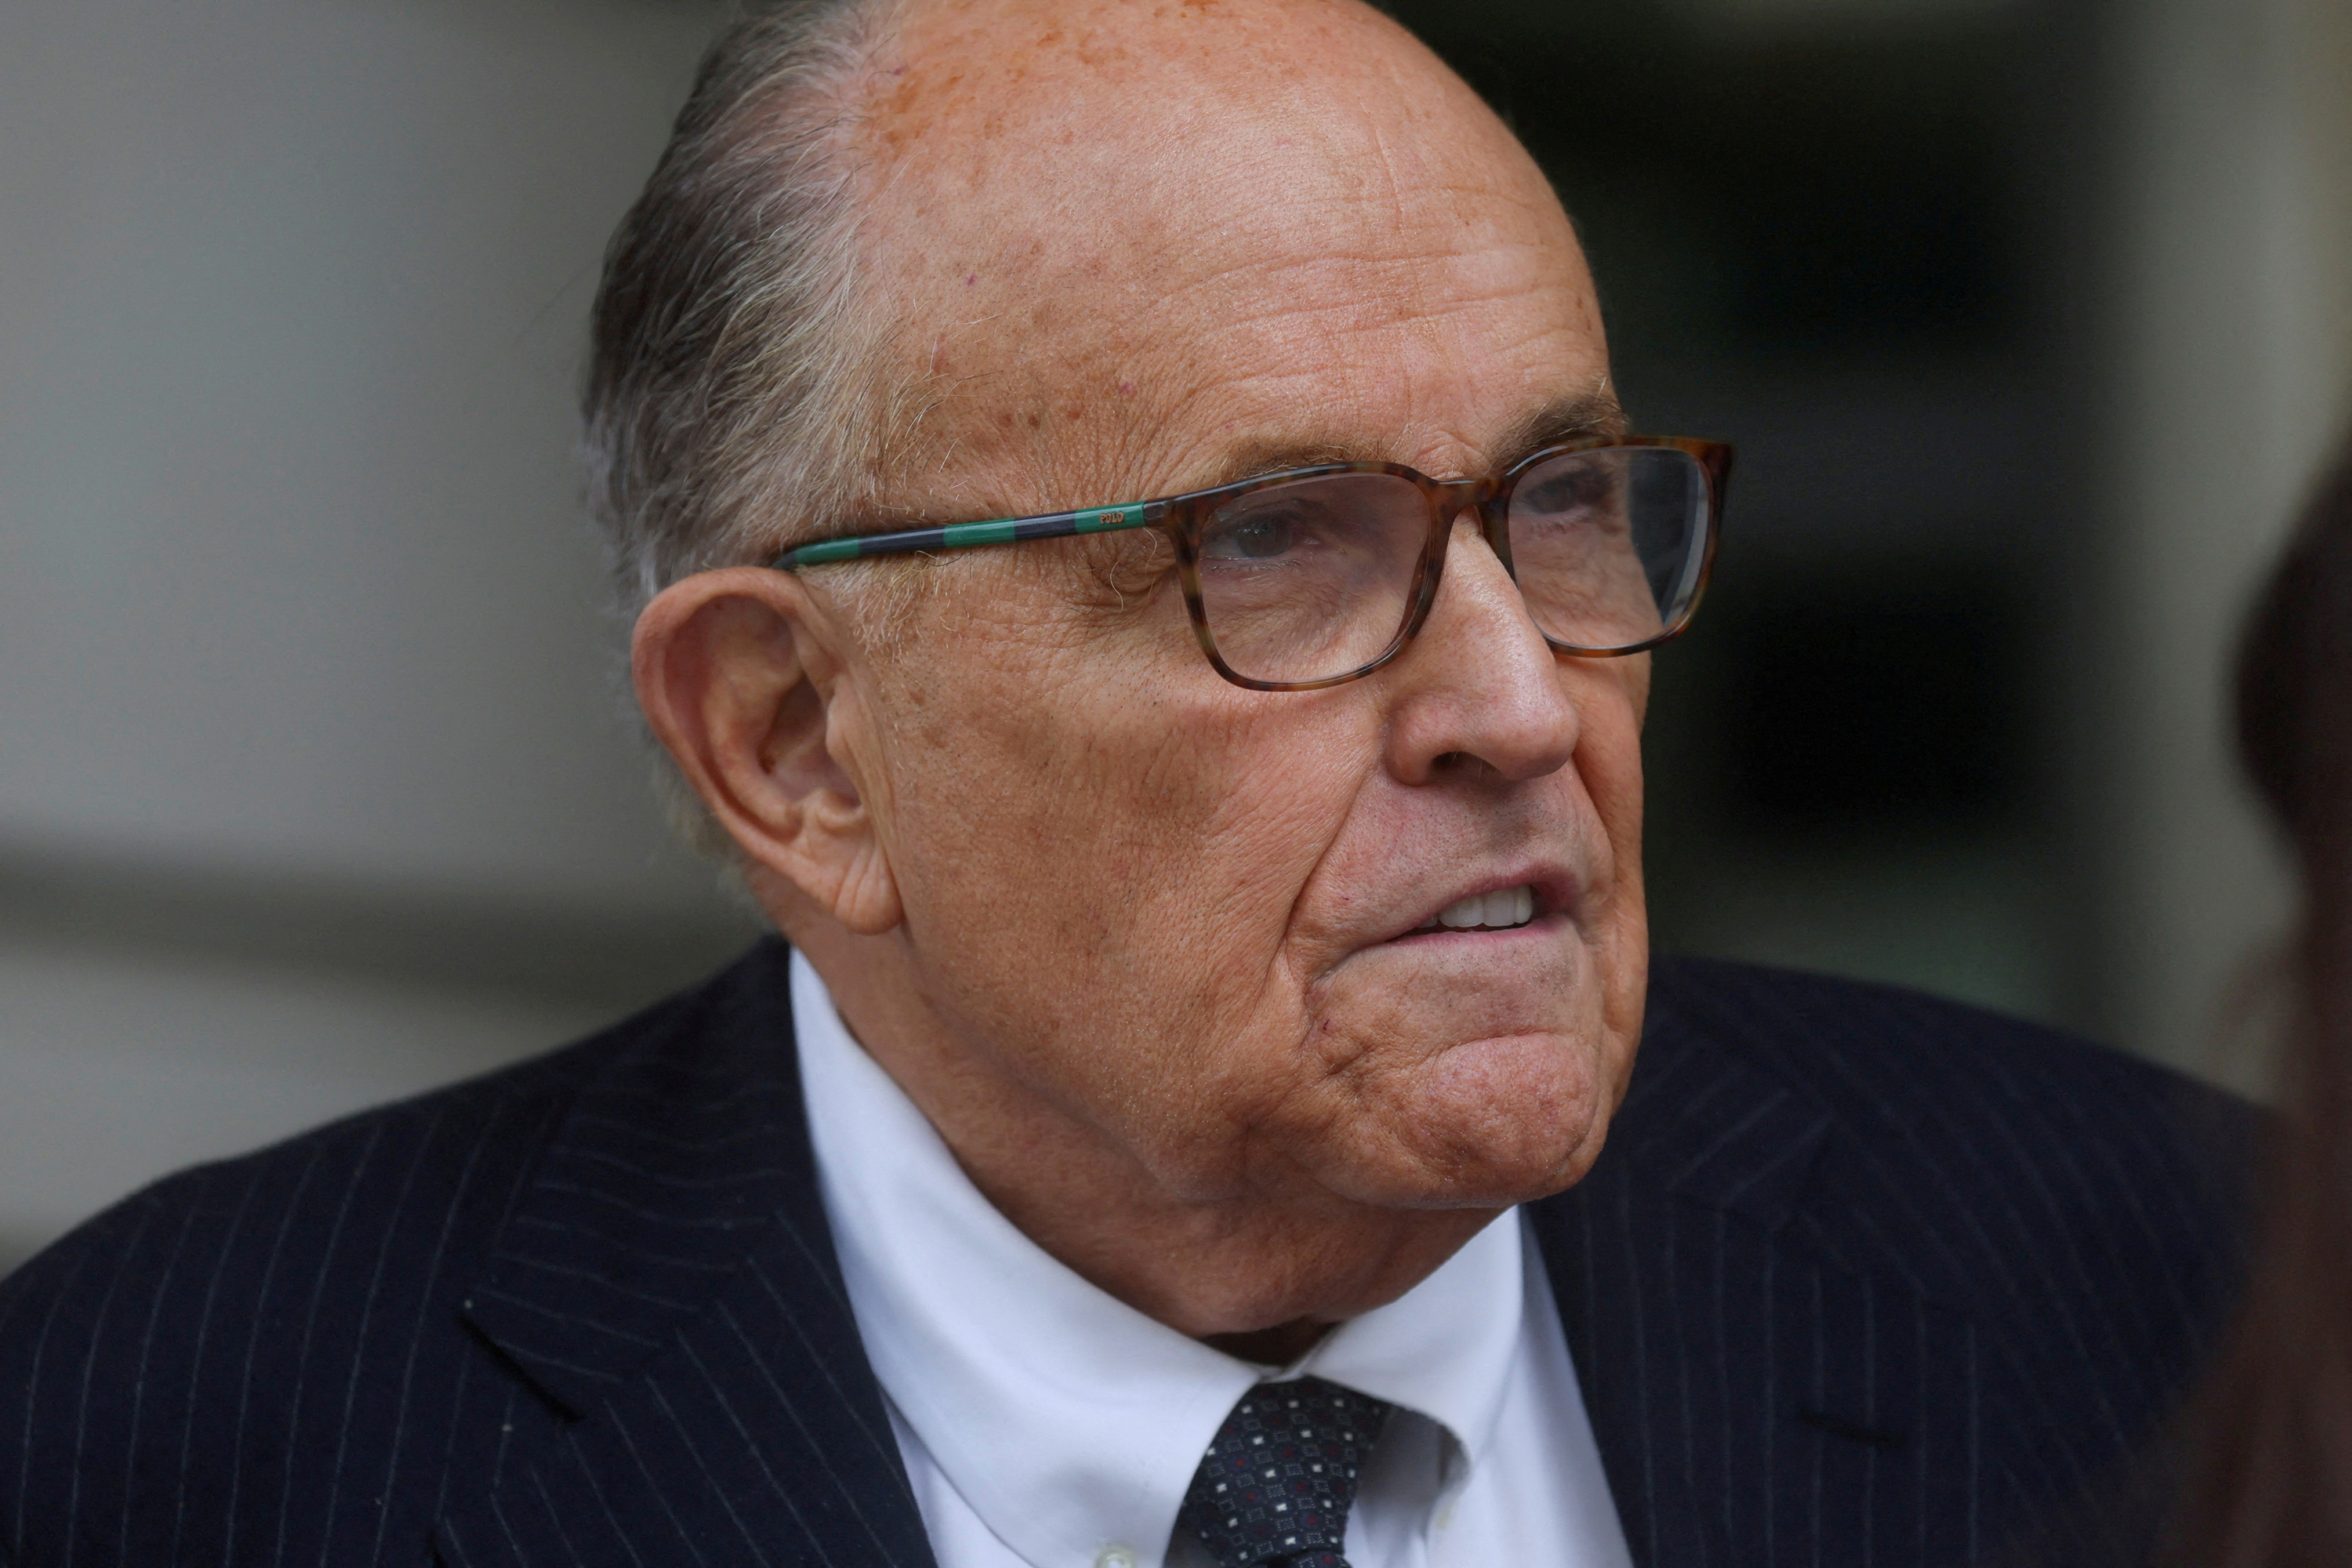 Former New York City Mayor Rudy Giuliani, an attorney for former US President Donald Trump during challenges to the 2020 election results, exits U.S. District Court after attending a hearing in a defamation suit related to the 2020 election results that has been brought against Giuliani by two Georgia election workers, at the federal courthouse in Washington, DC, on May 19.